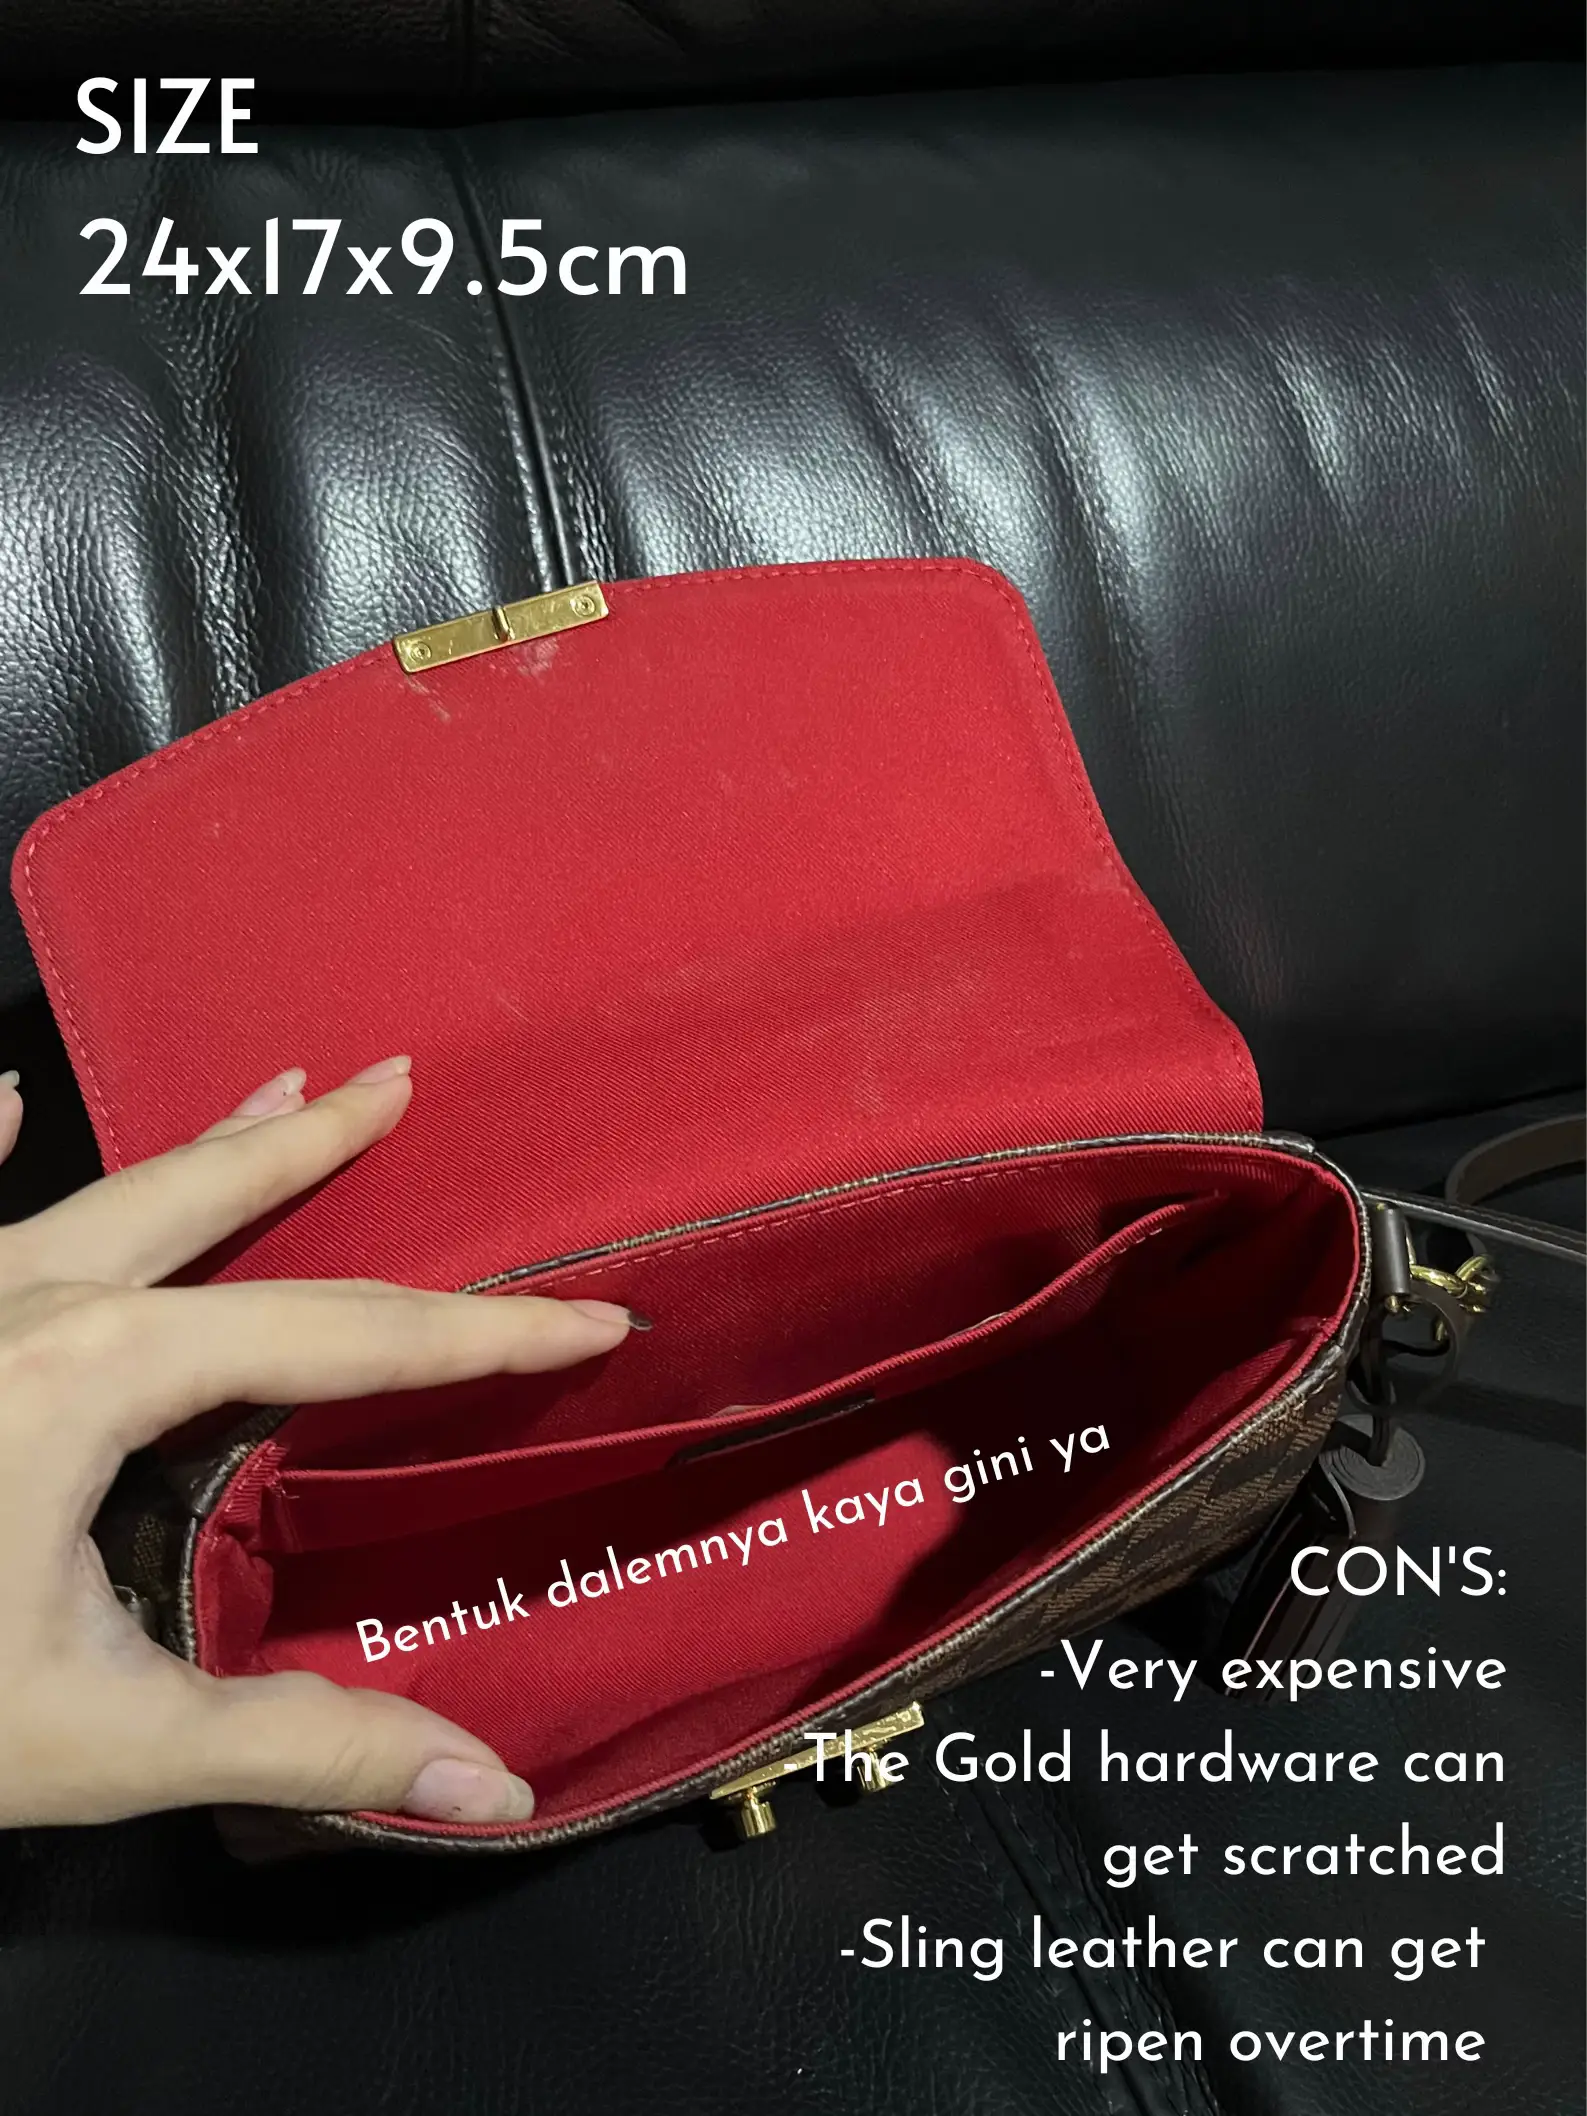 Louis Vuitton Monogram Cannes - Bag Review, Gallery posted by Cindy Monty